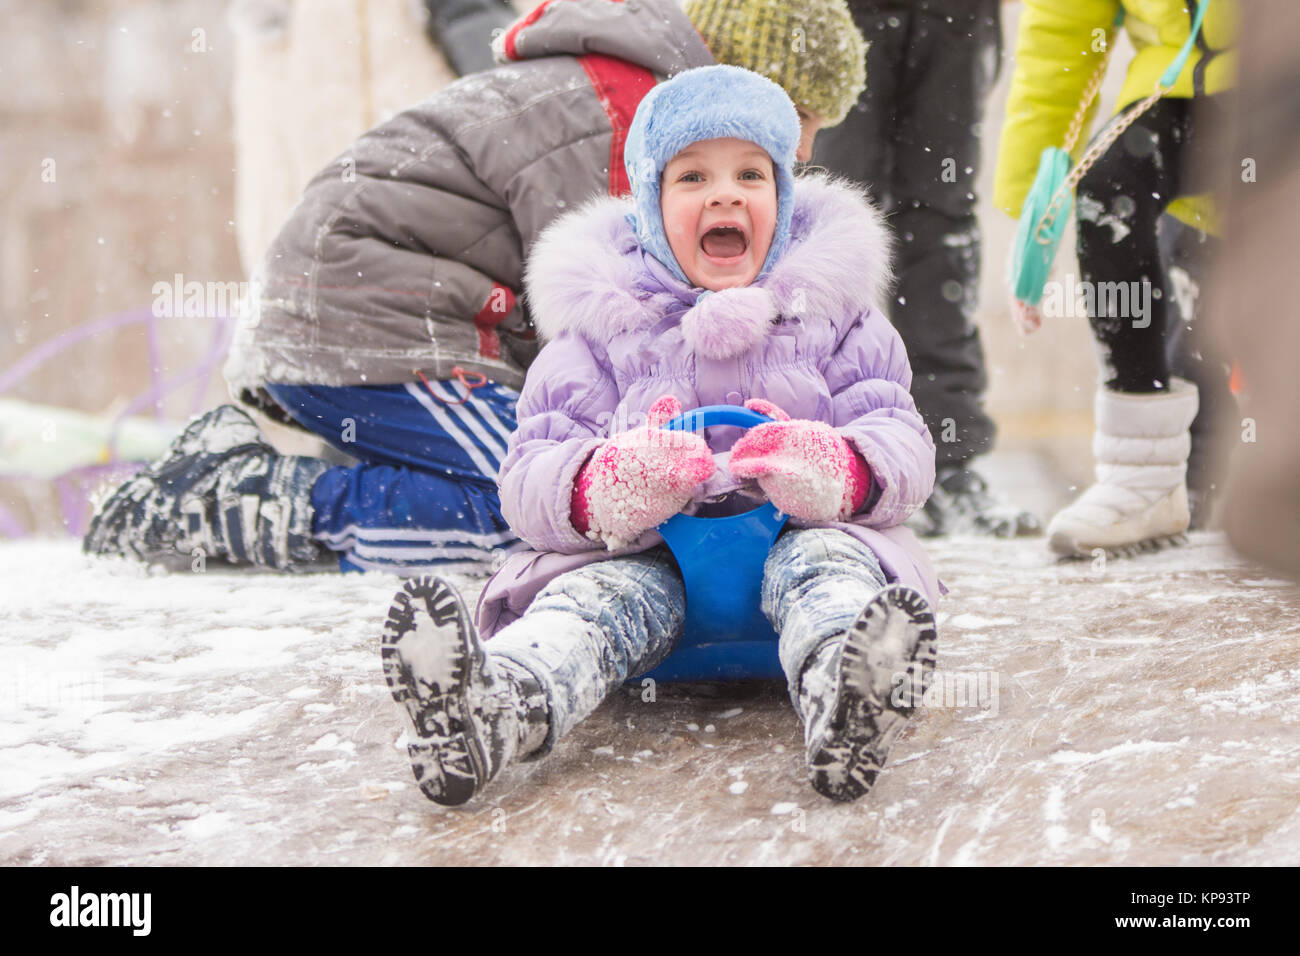 Five-year girl fun screaming slides down the icy hill Stock Photo